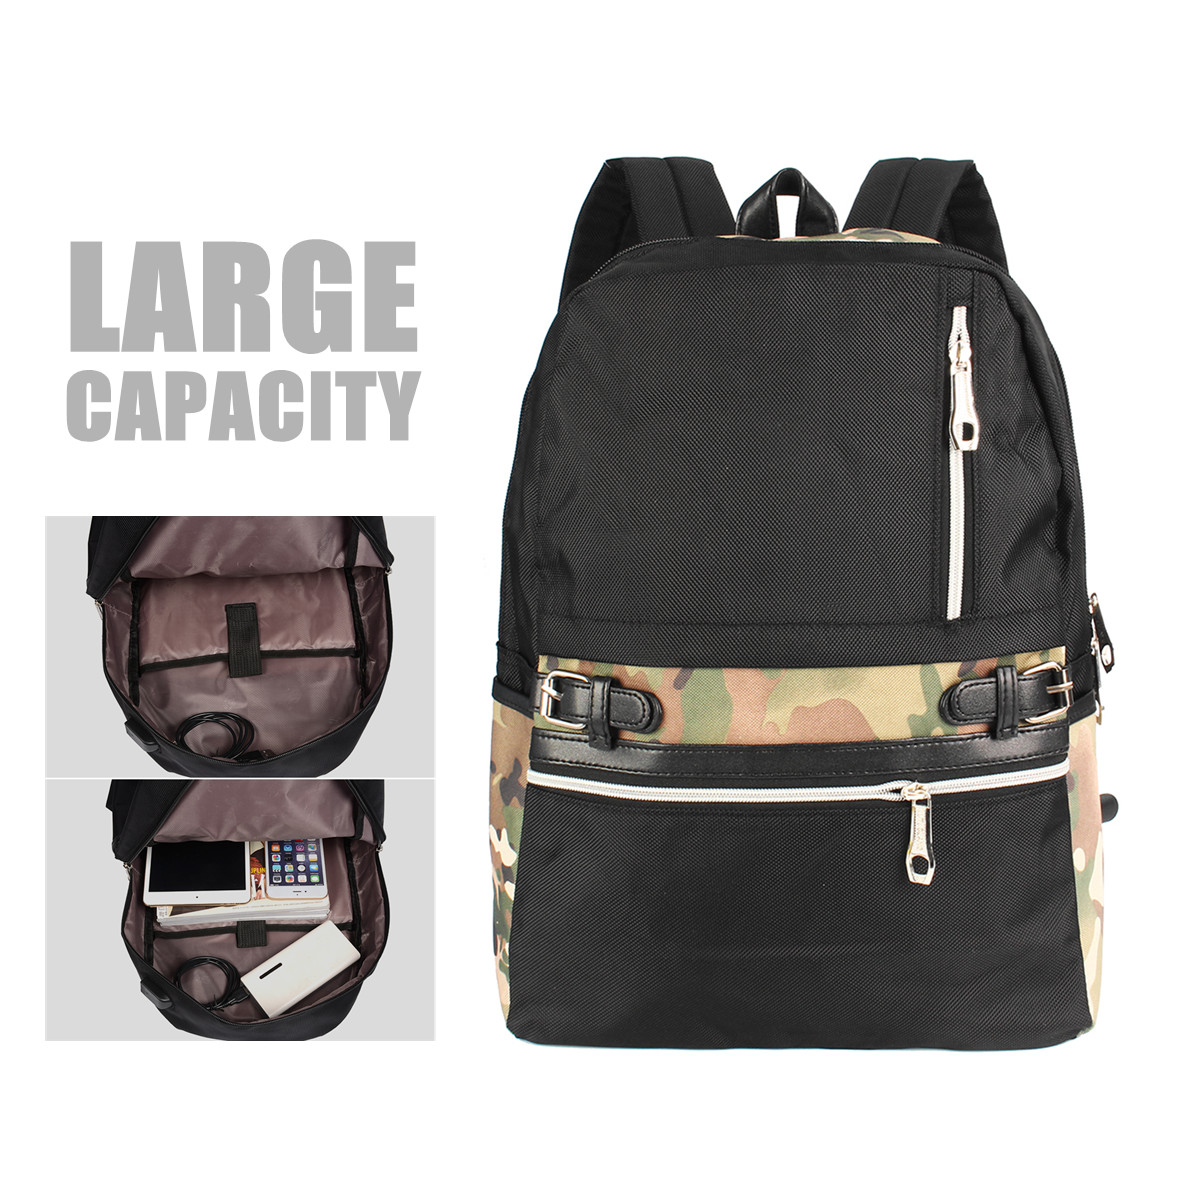 295x125x435cm-Anti-Theft-Waterproof-Backpack-With-USB-Charging-Port-Outdoor-Travel-Fishing-Bag-1287206-2